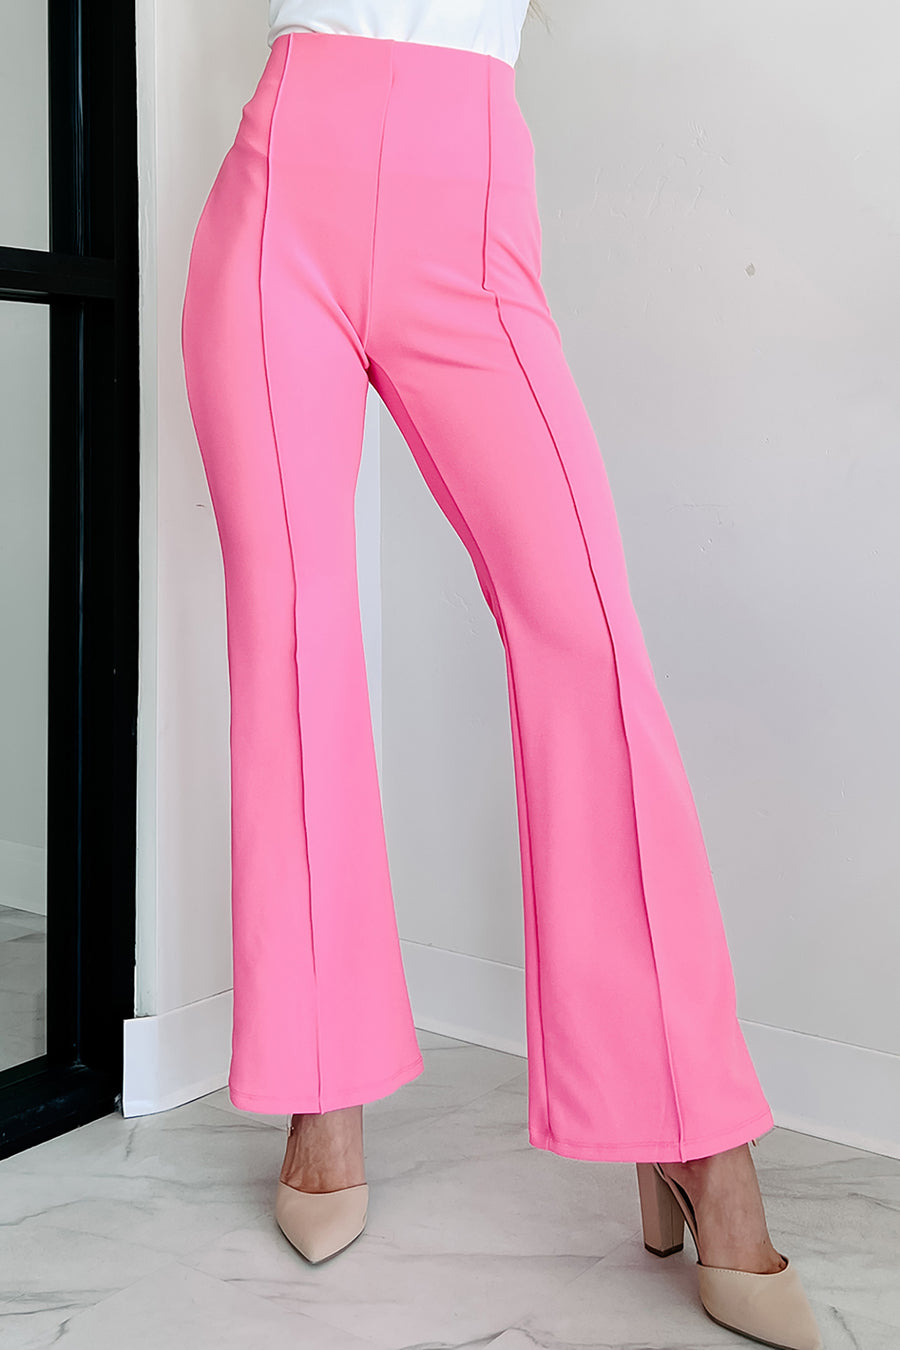 Style Stance High Waist Flare Pants (Hot Pink)